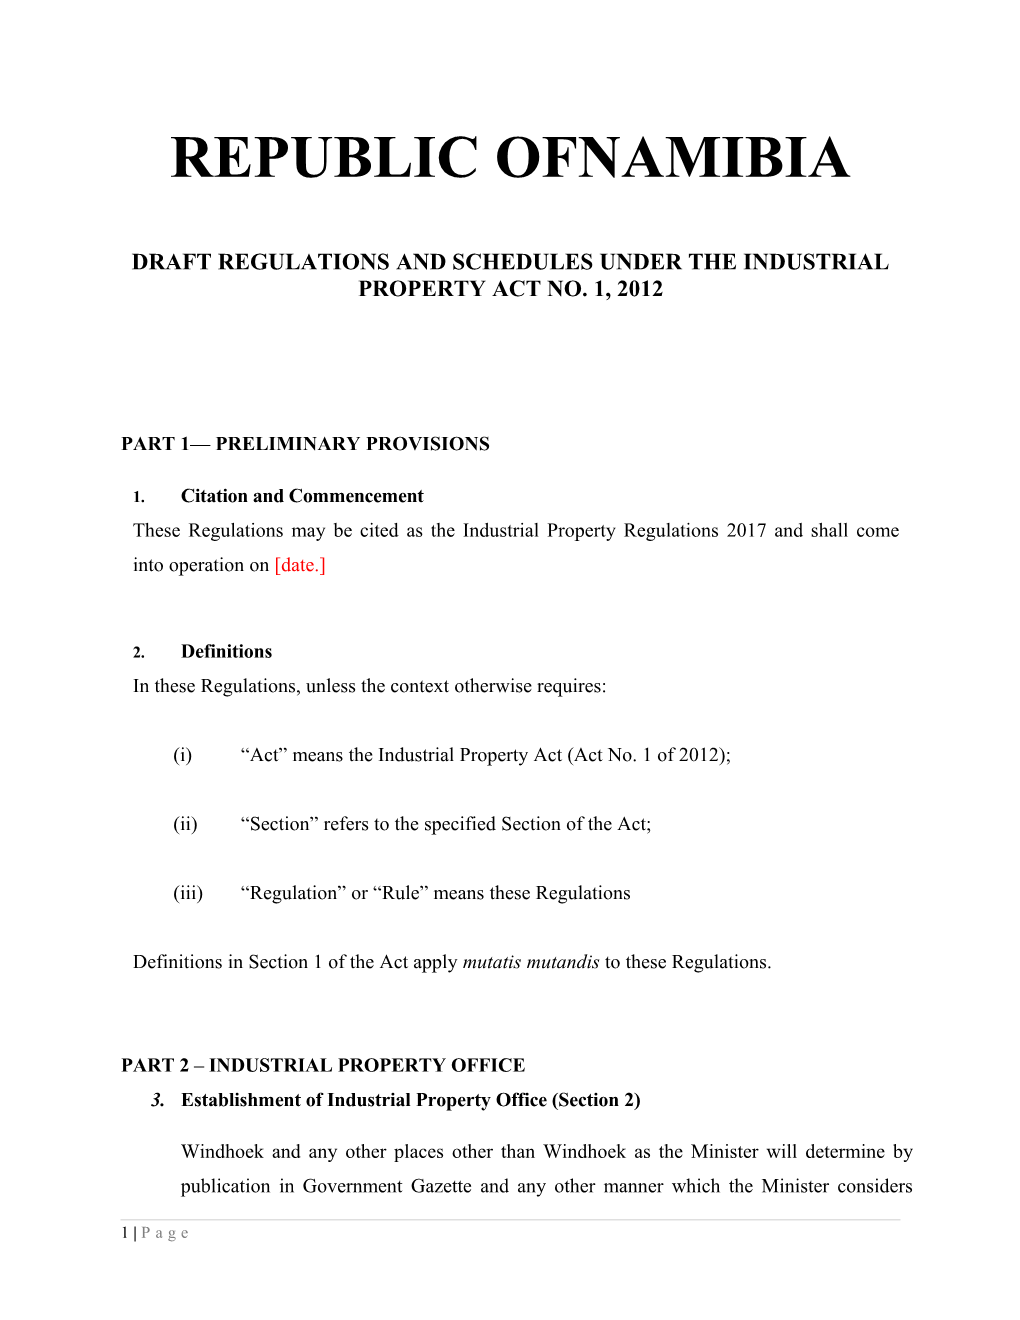 Draft Regulations and Schedules Under the Industrial Property Act No. 1, 2012